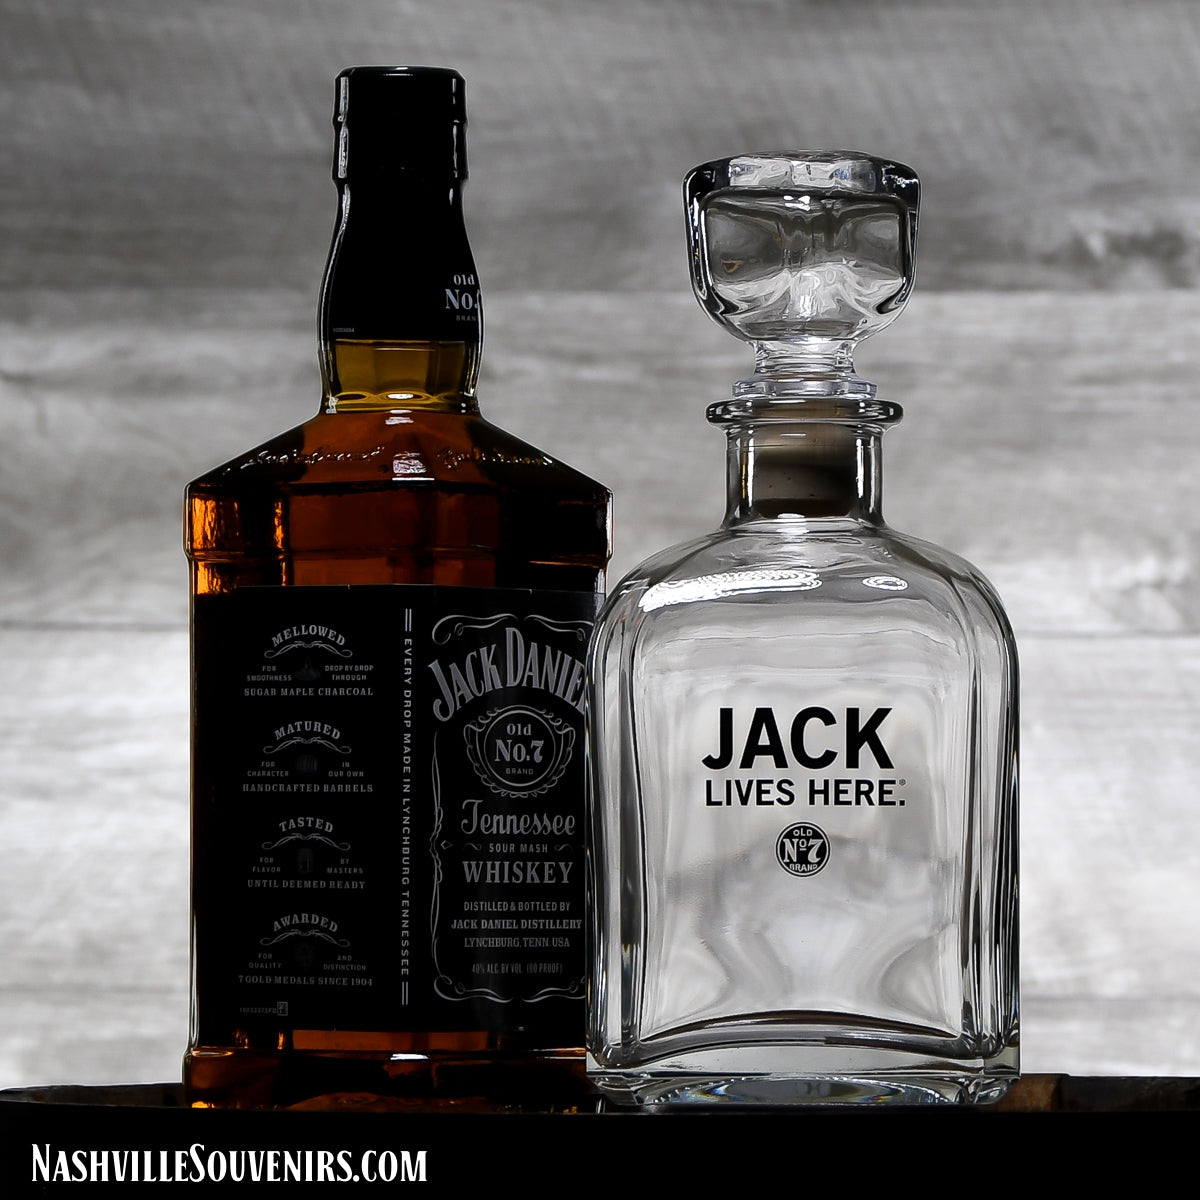 Show your friends what real class looks like, pour from a licensed Jack Daniels Decanter featuring "Jack Lives Here" Logo. And as a bonus you'll get FREE SHIPPING on all US orders over $75!